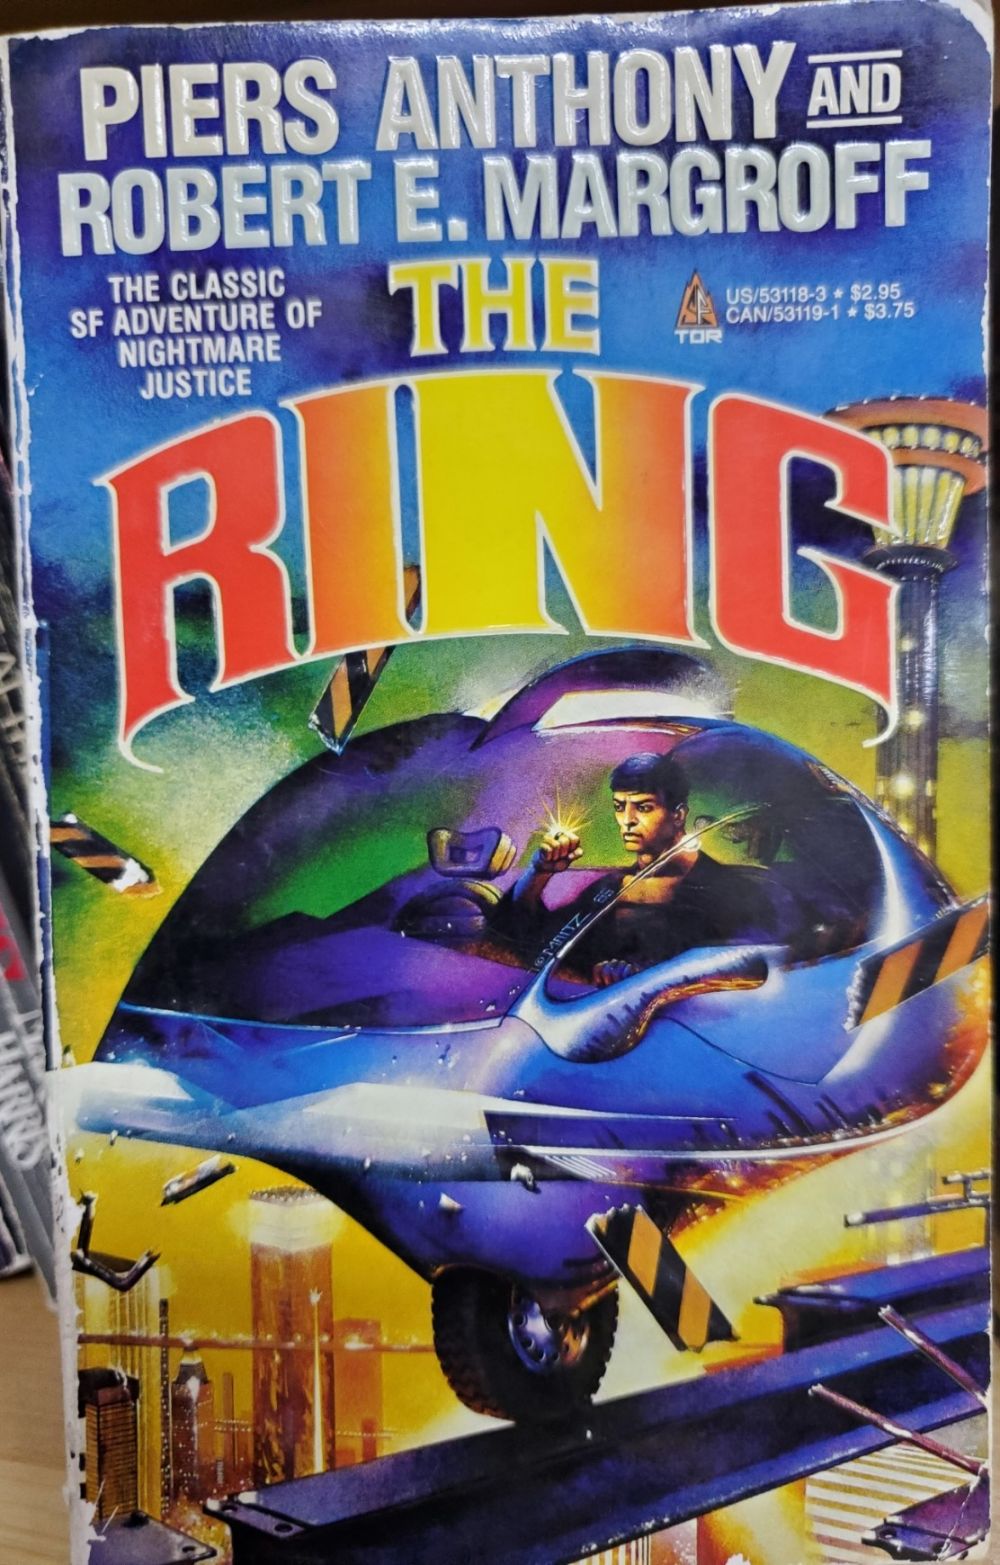 Ring-a-ding-ting